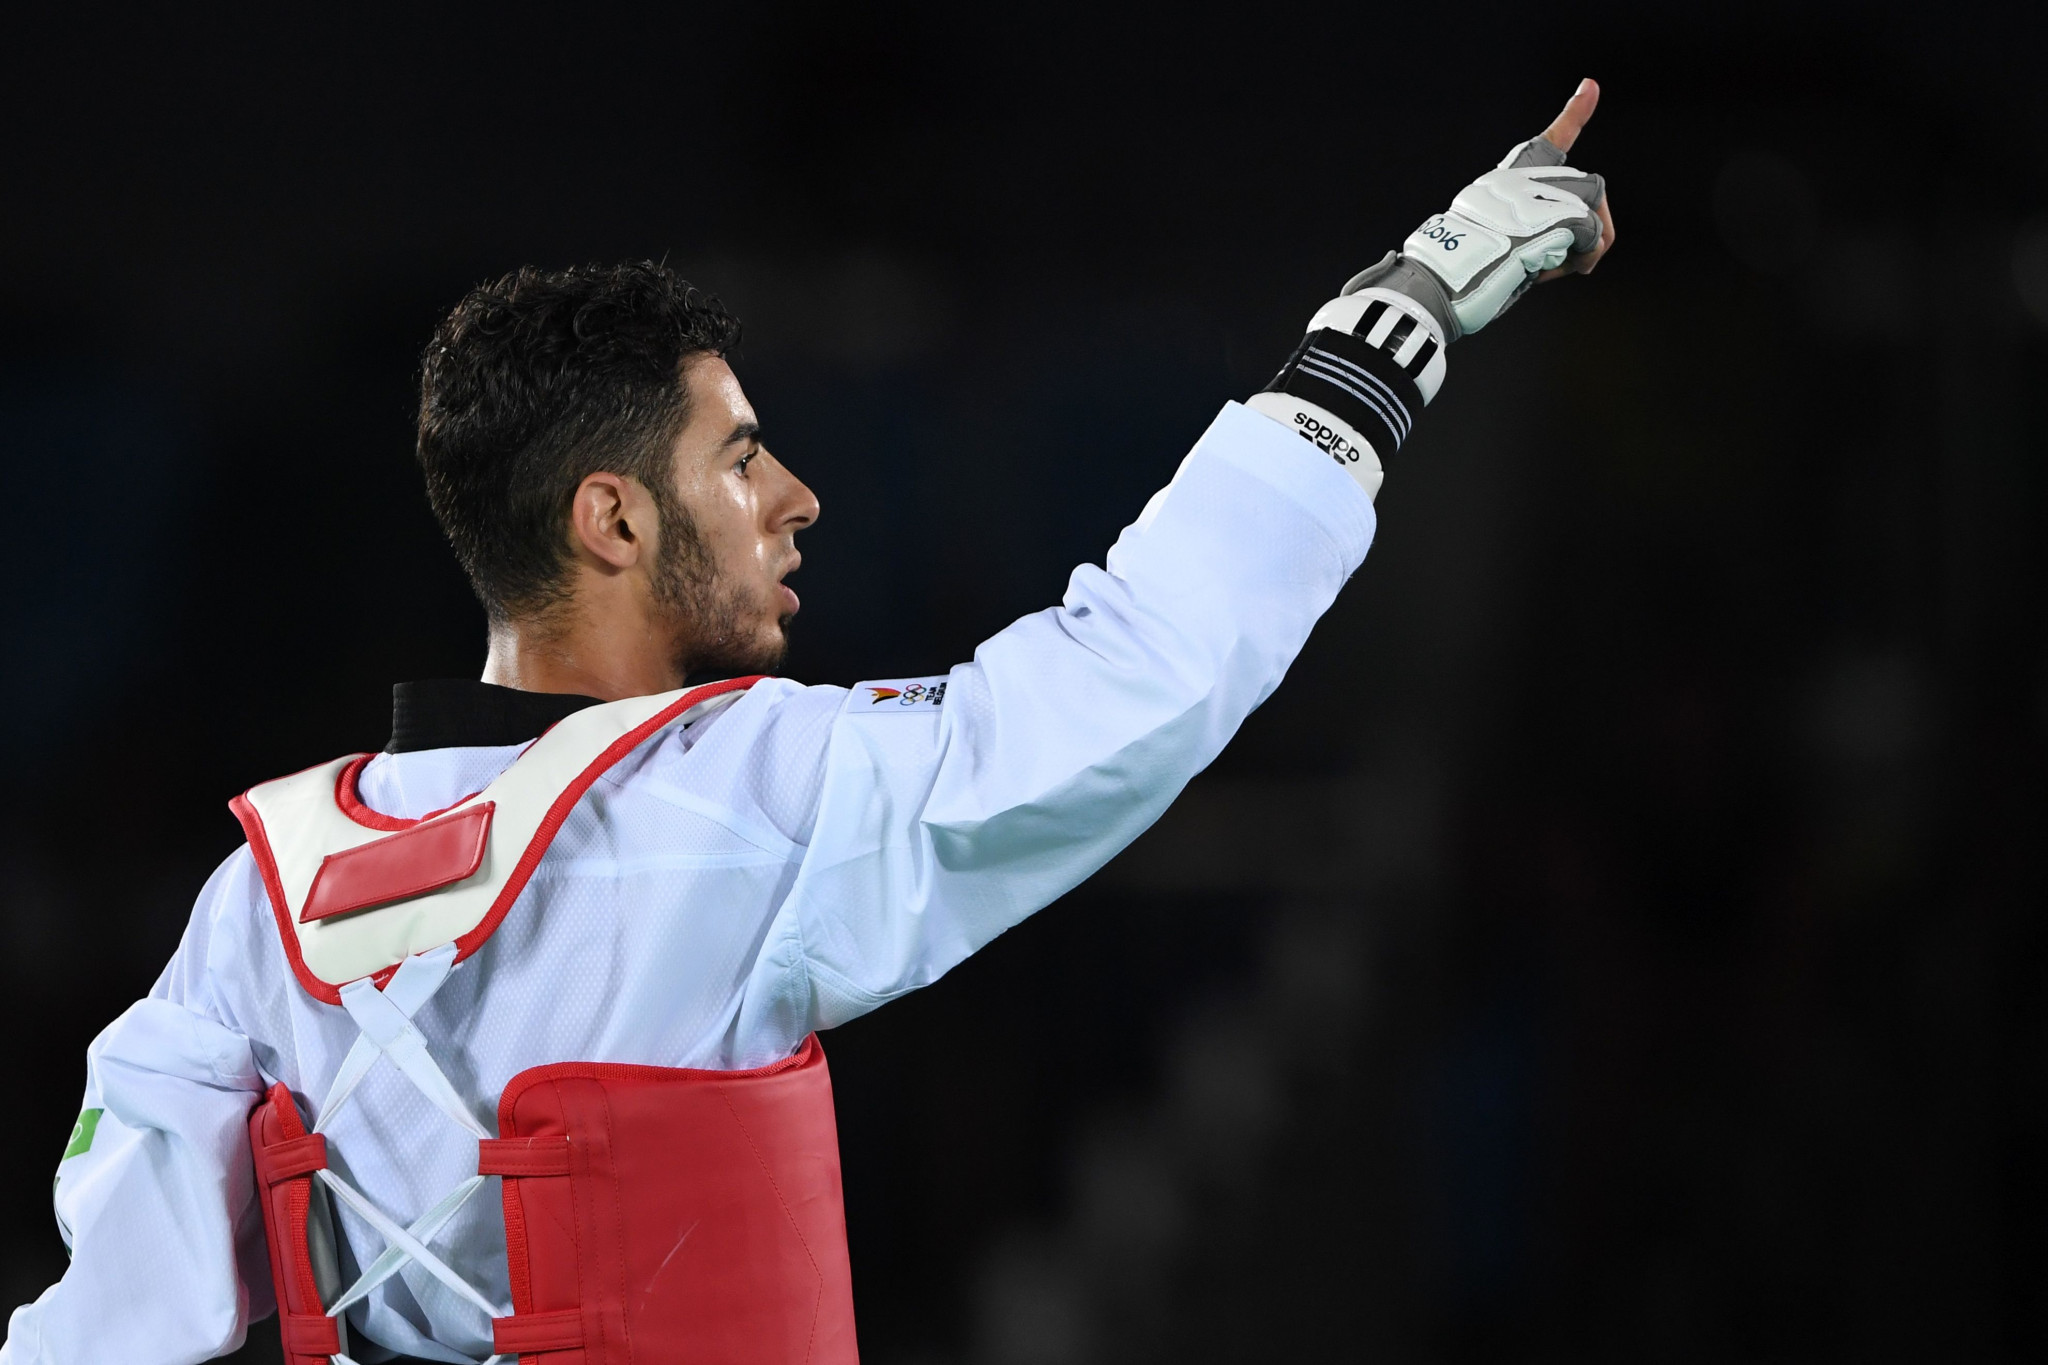 Eight stand for a place on World Taekwondo Athletes' Committee